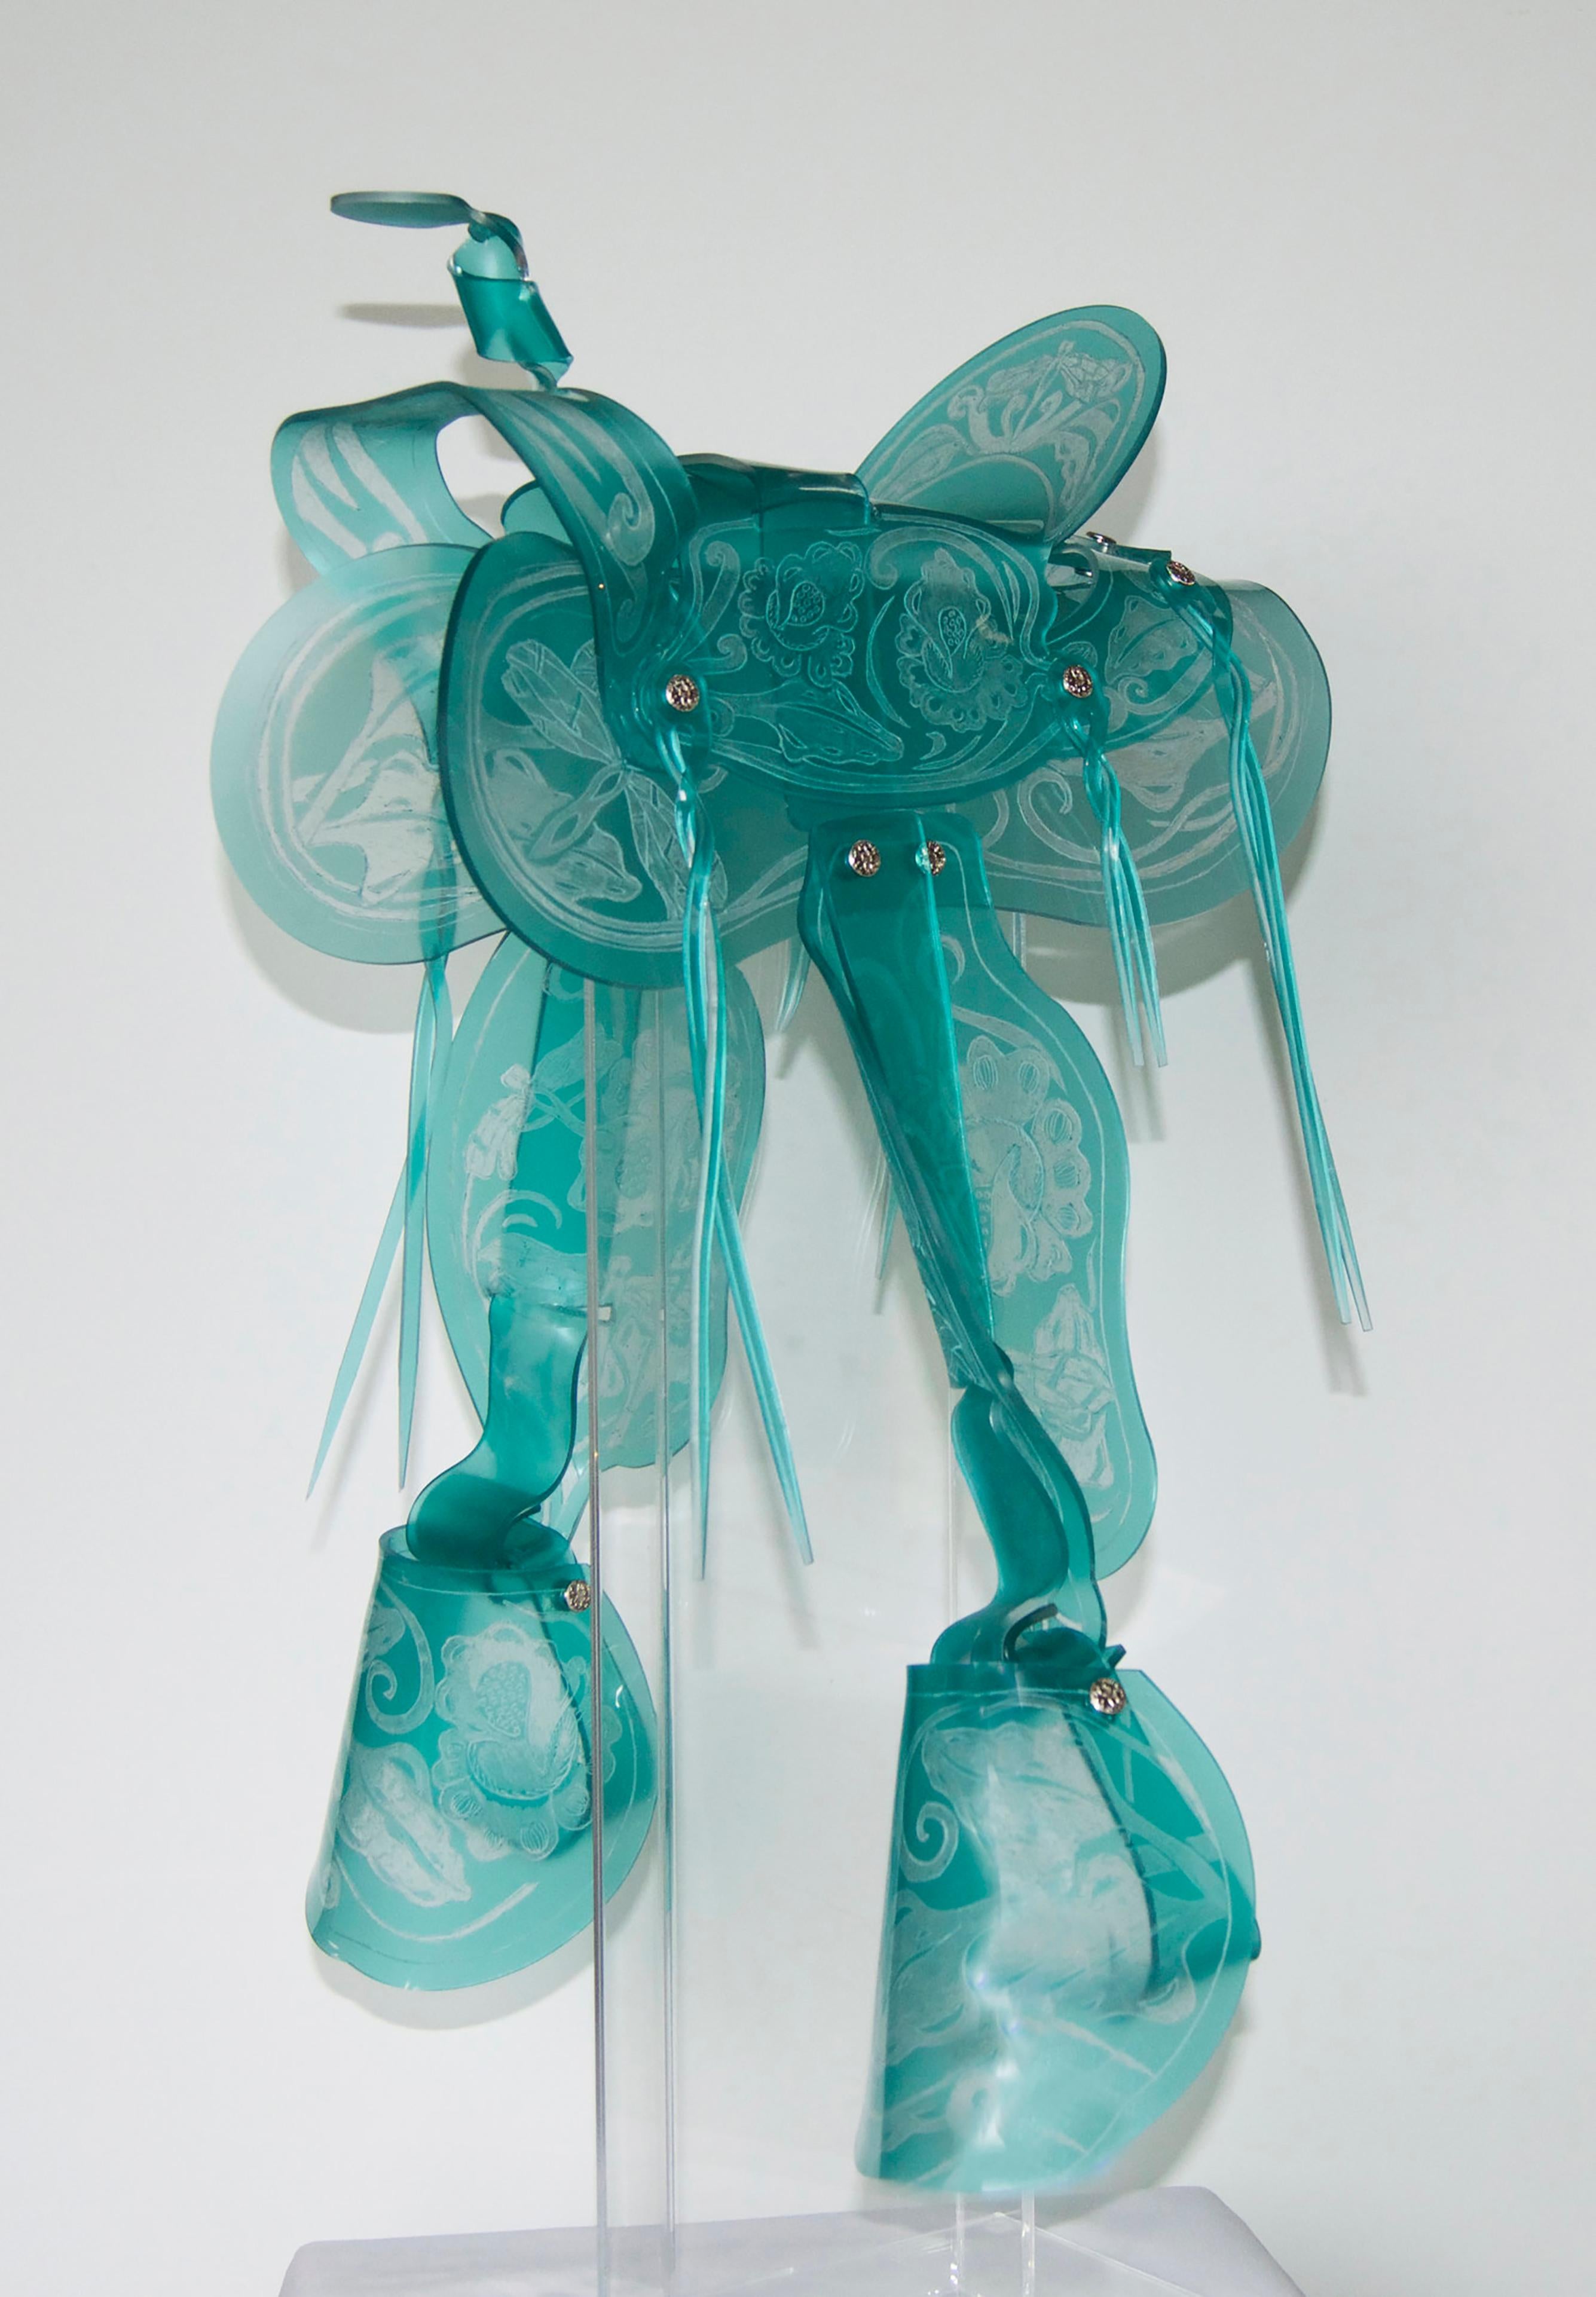 Maeve Eichelberger Figurative Sculpture - "Turquoise" -  UV inks printed on acrylic hand formed  & etched 